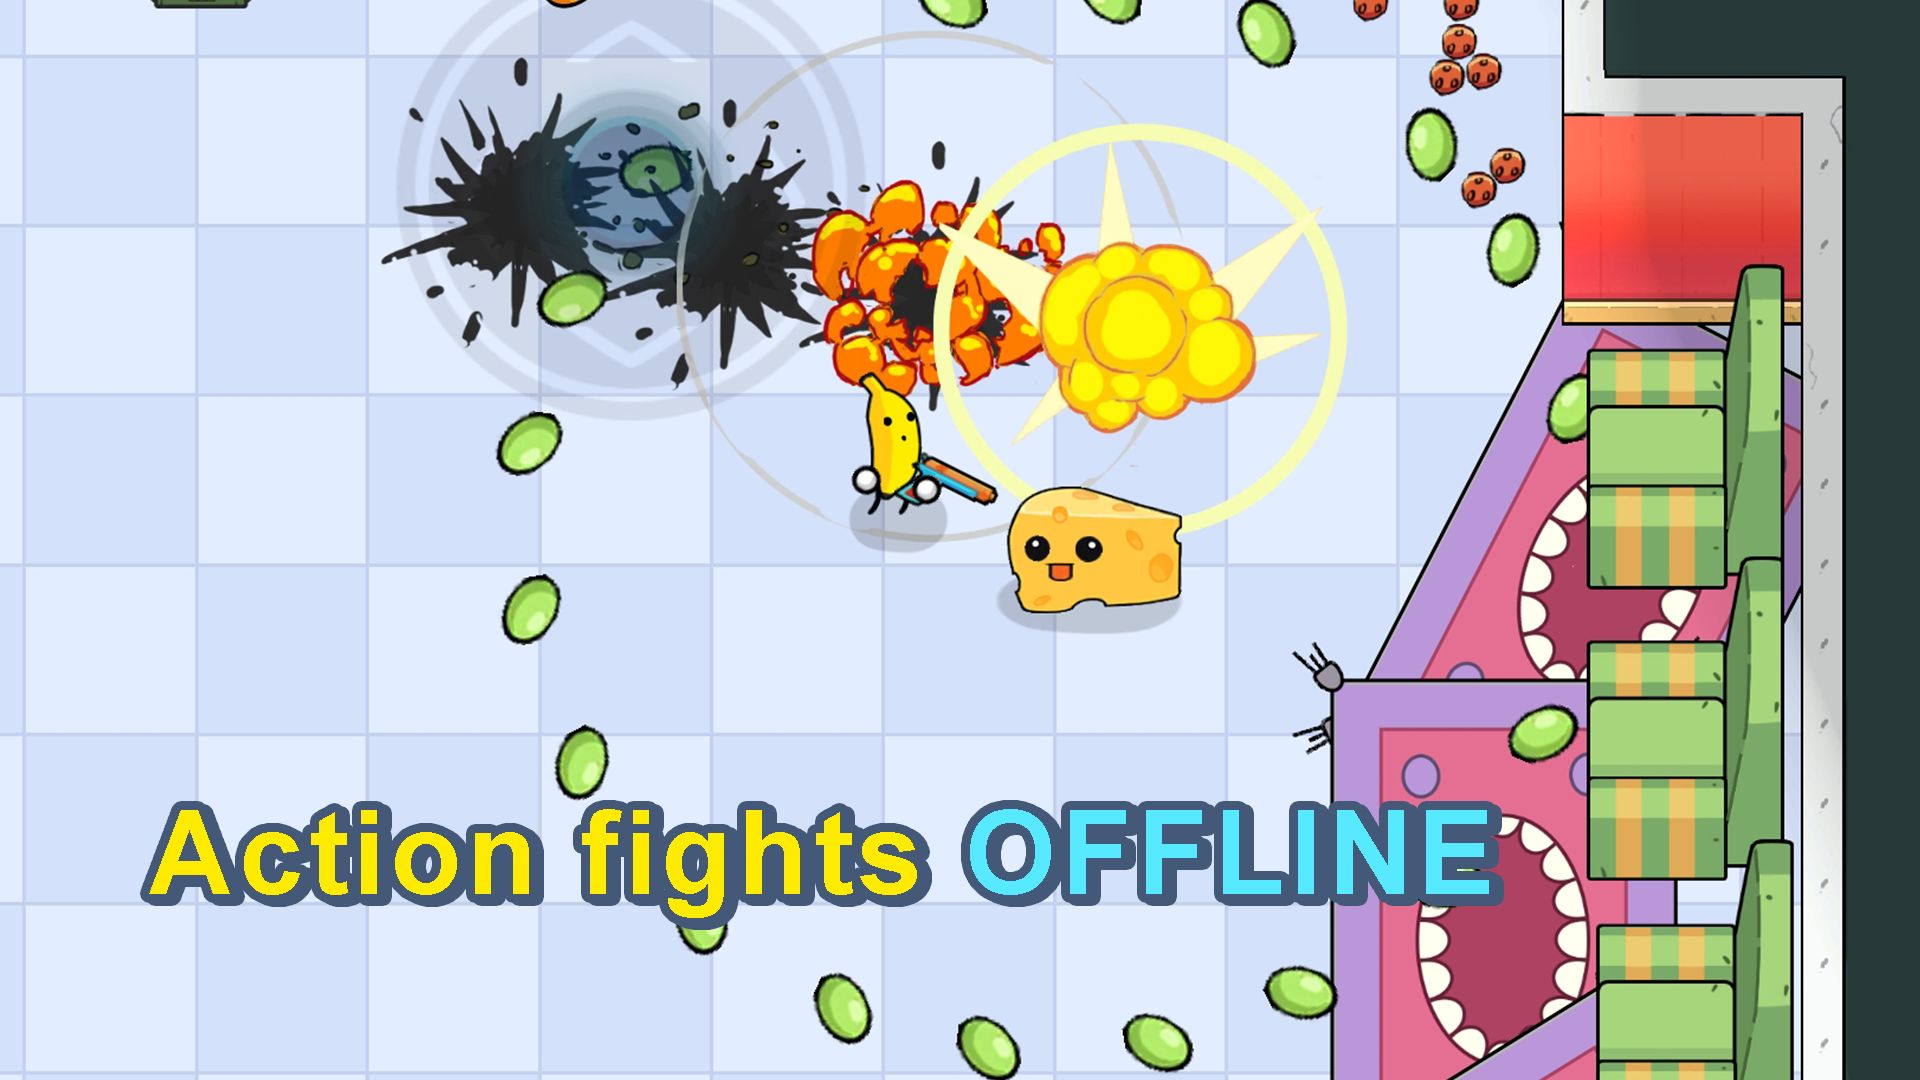 Full version of Android Offline game apk Banana Gun roguelike offline for tablet and phone.